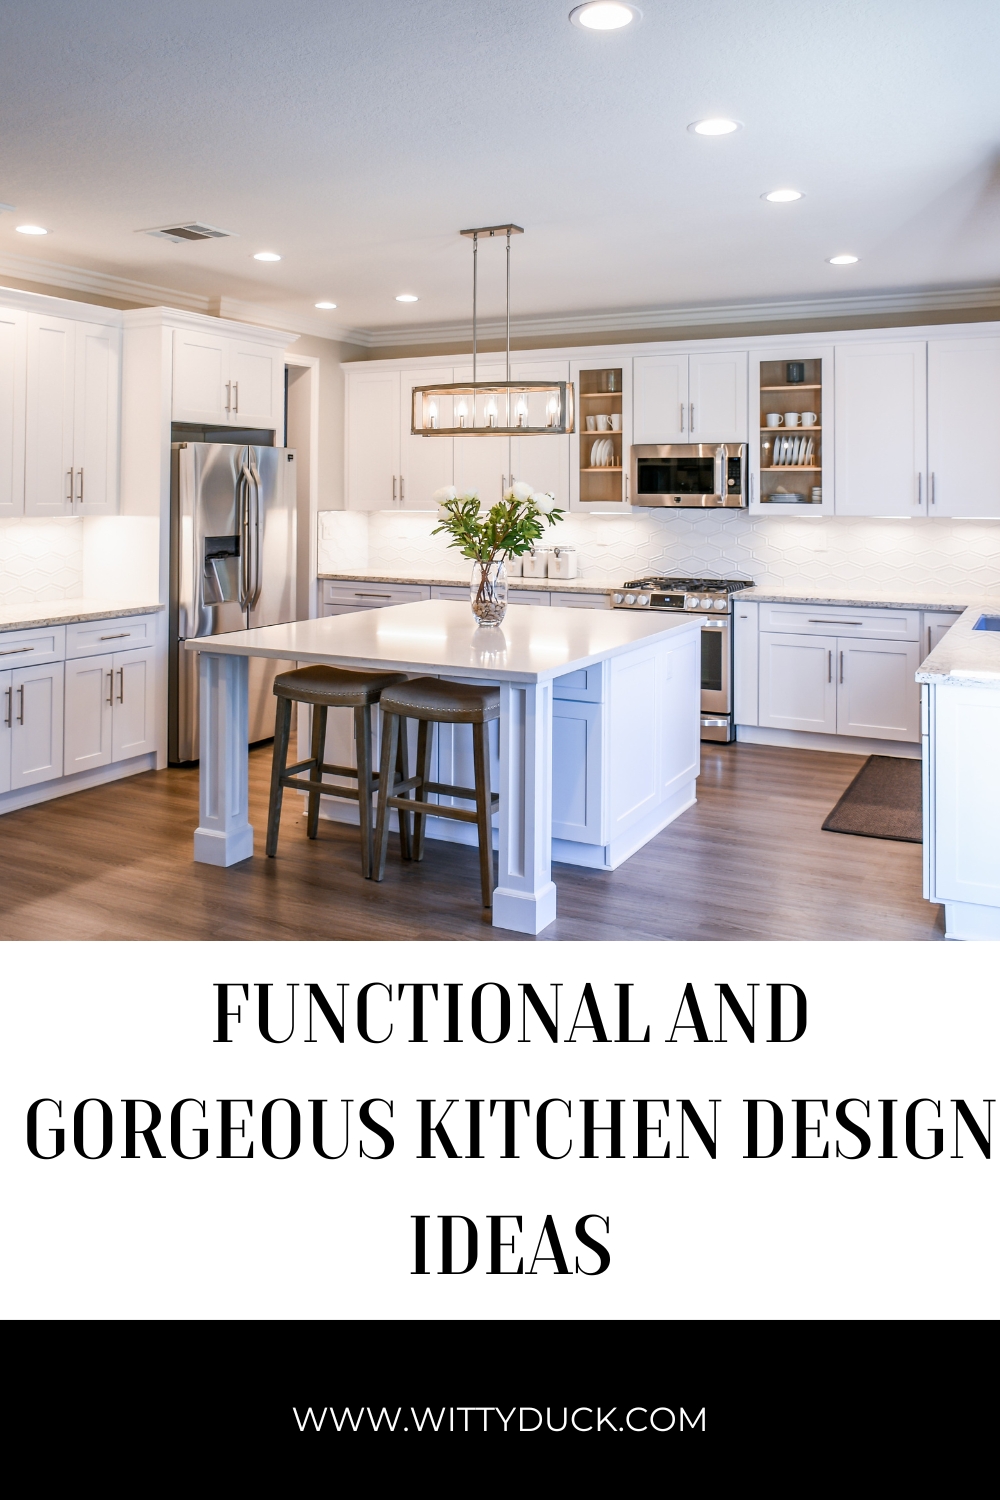 15+ Functional and Gorgeous Kitchen Design Ideas